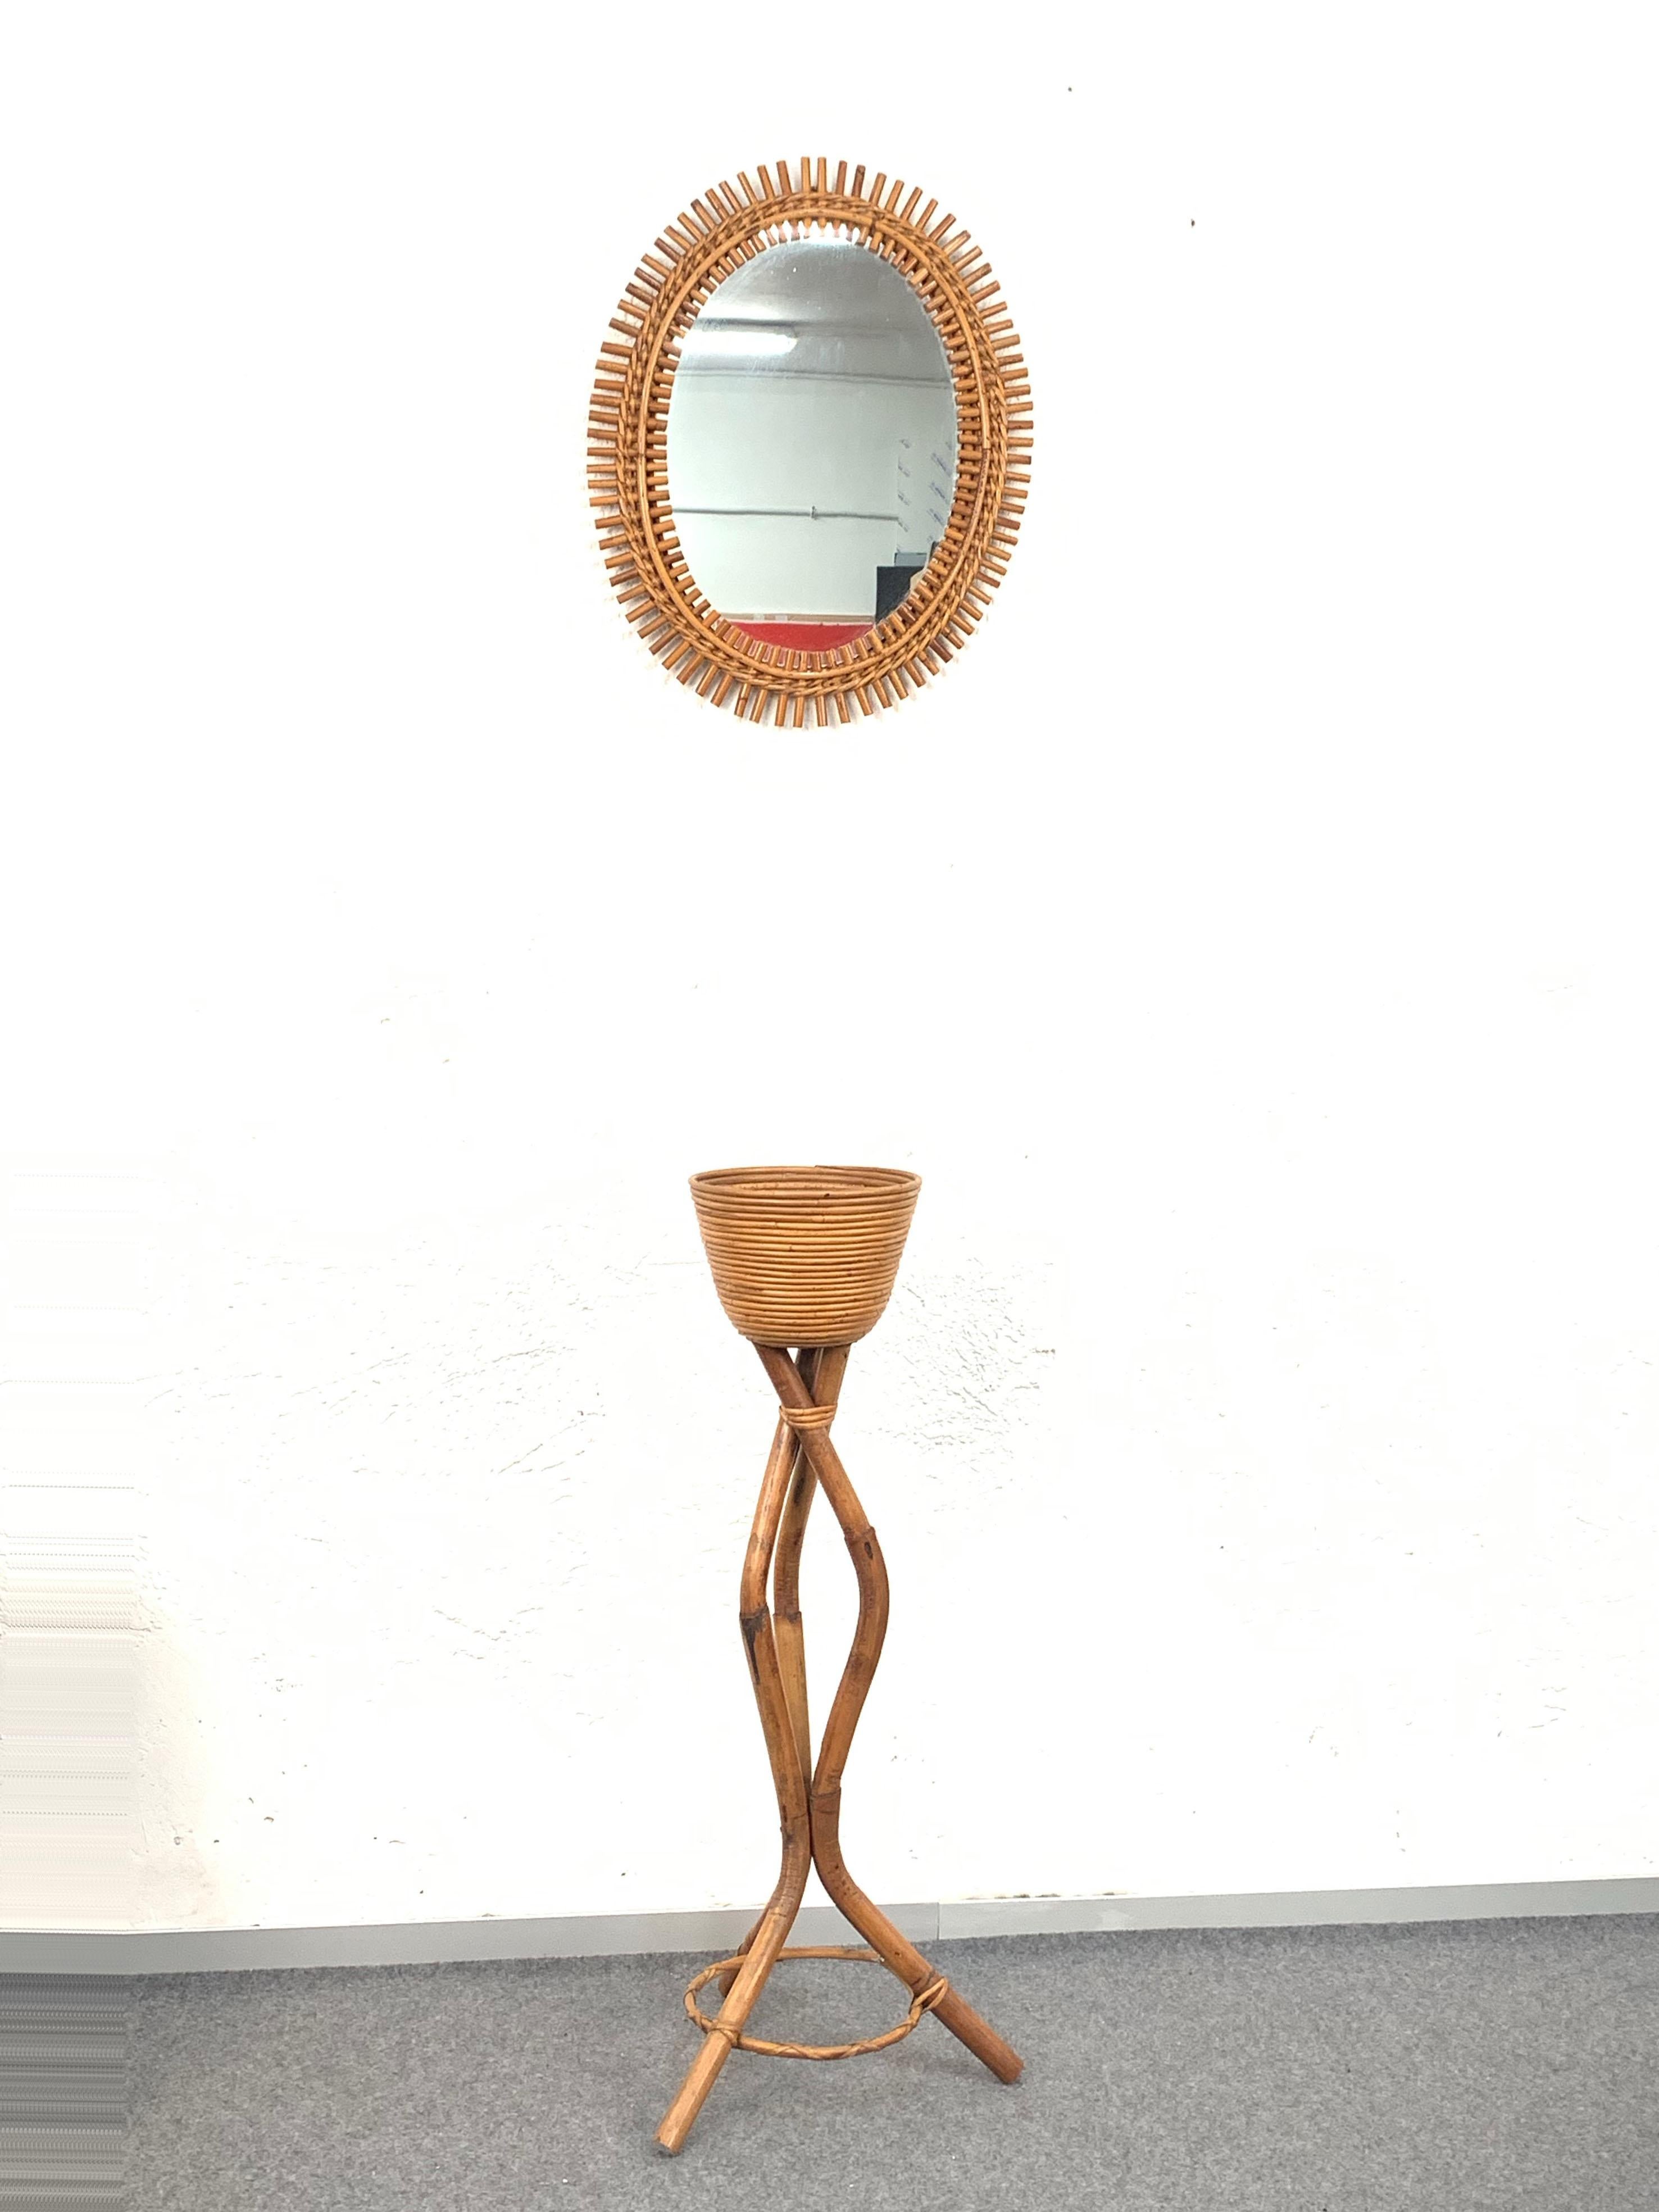 French Riviera Oval Wall Mirror in Bamboo and Rattan, 1960s Midcentury 10